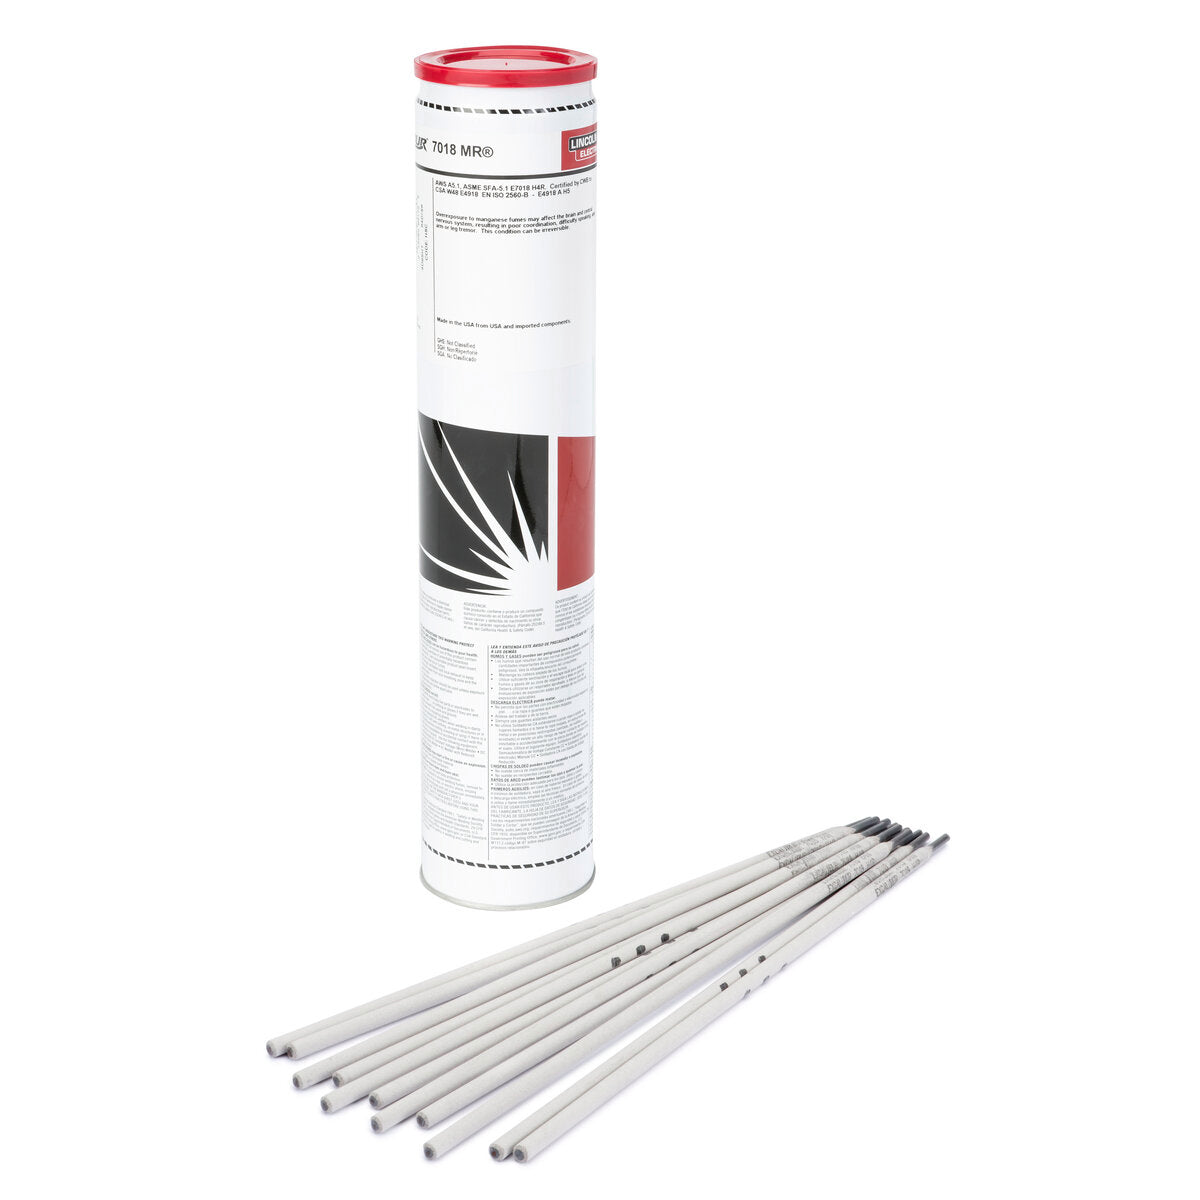 Lincoln Electric - Excalibur® 7018 MR® Stick (SMAW) Electrode, 5/32x14 in, (3) 10 lb Easy Open Can - ED032590